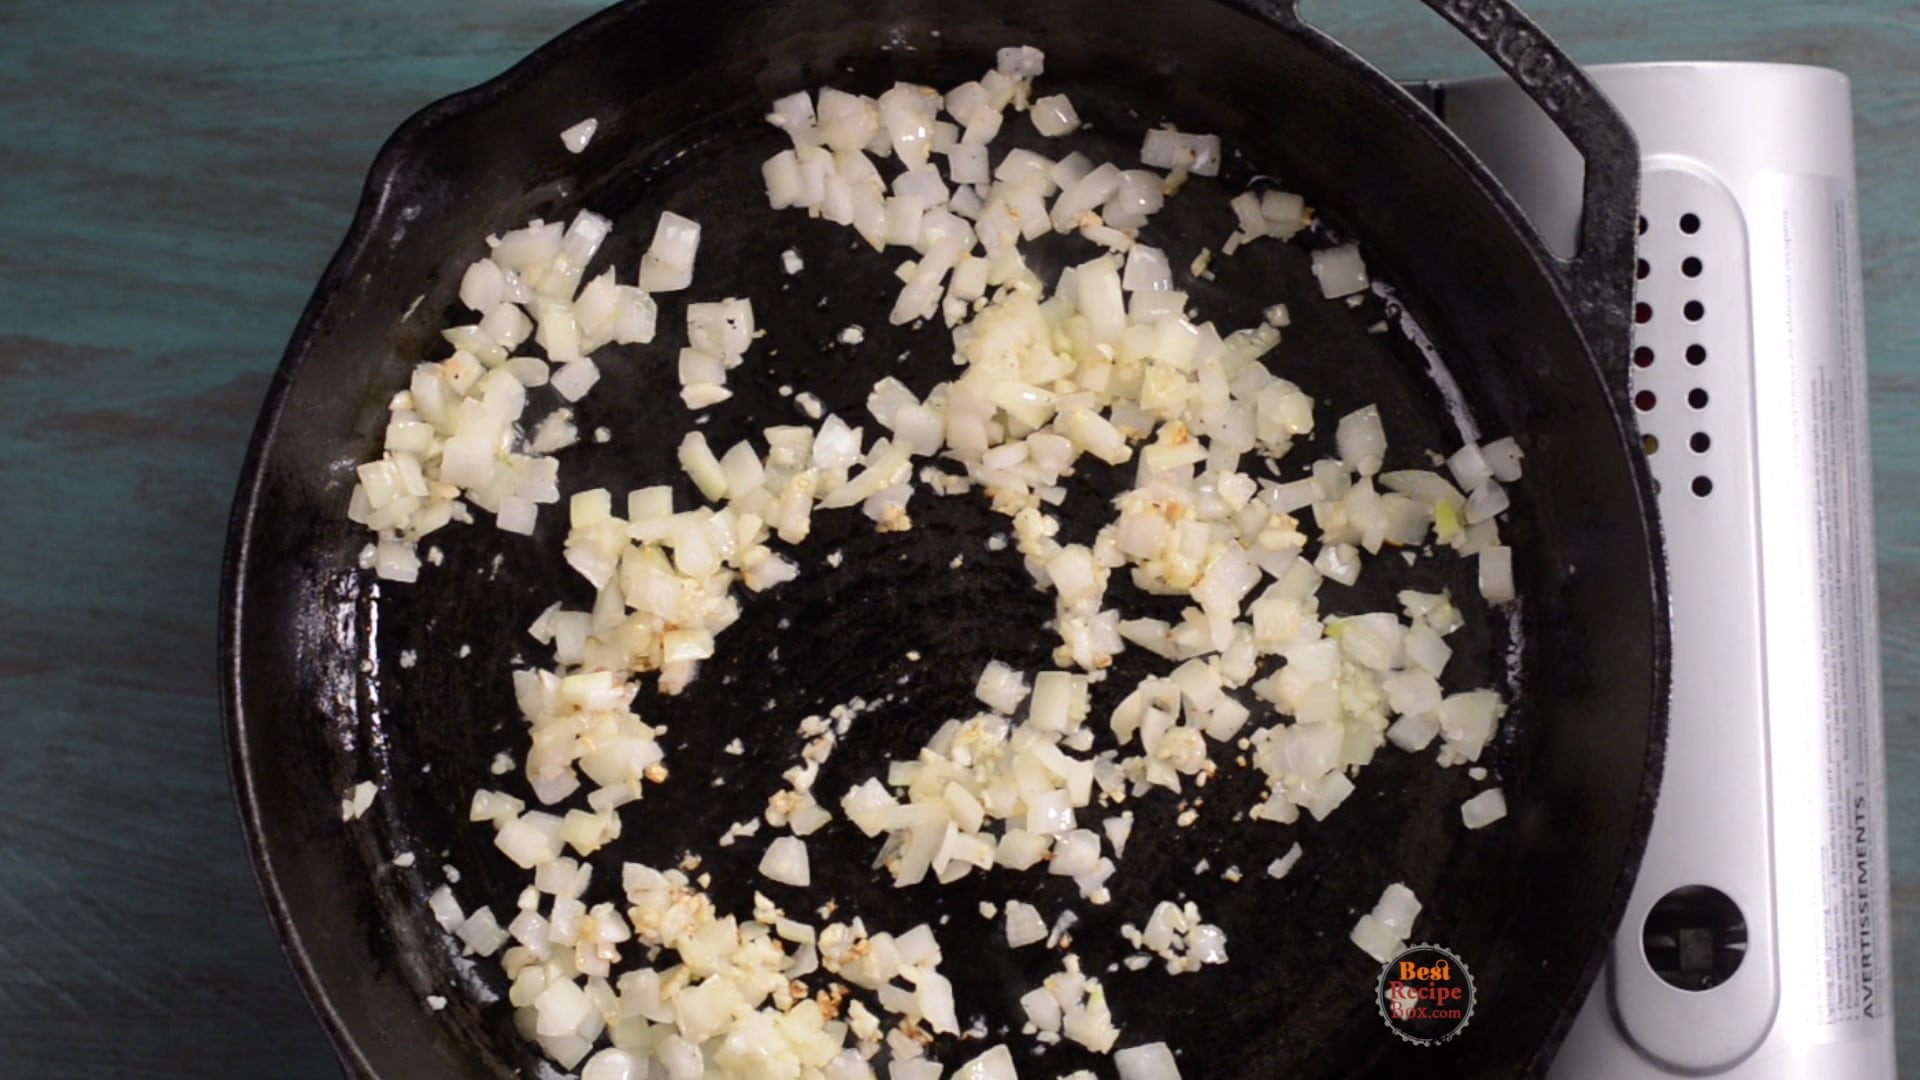 Cooking onions and garlic in a skillet